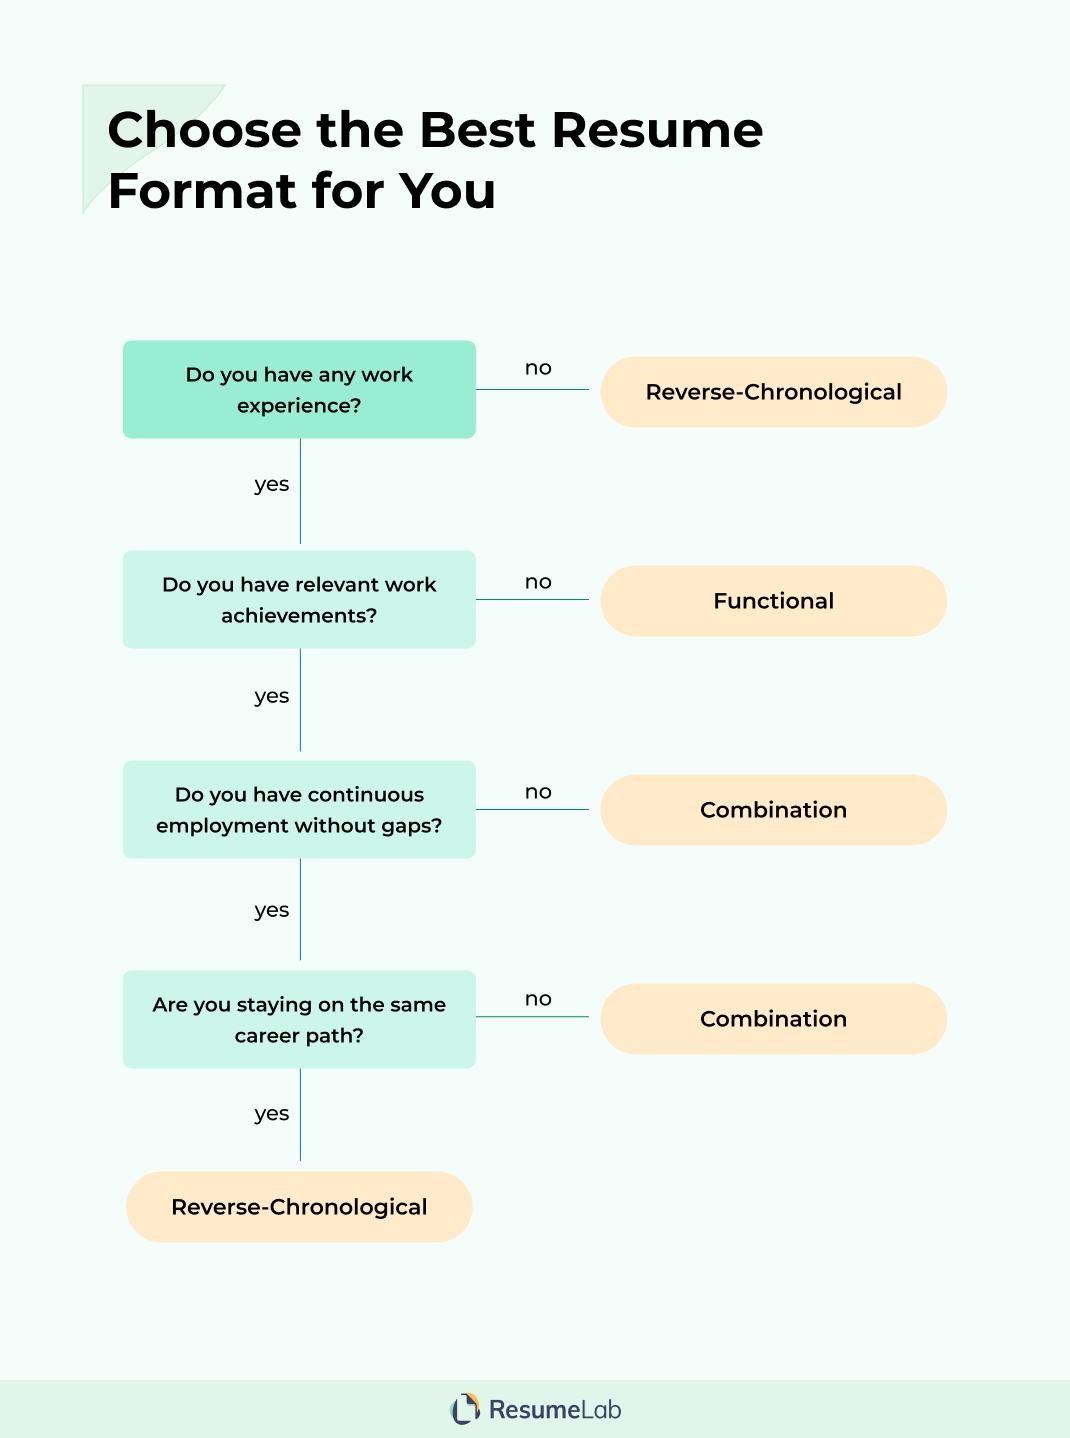 Resume Format Decision Tree. Reverse-chronological if you achieved measurable results and held consistent employment. Functional to emphasize skills or a combination format for a flexible structure.